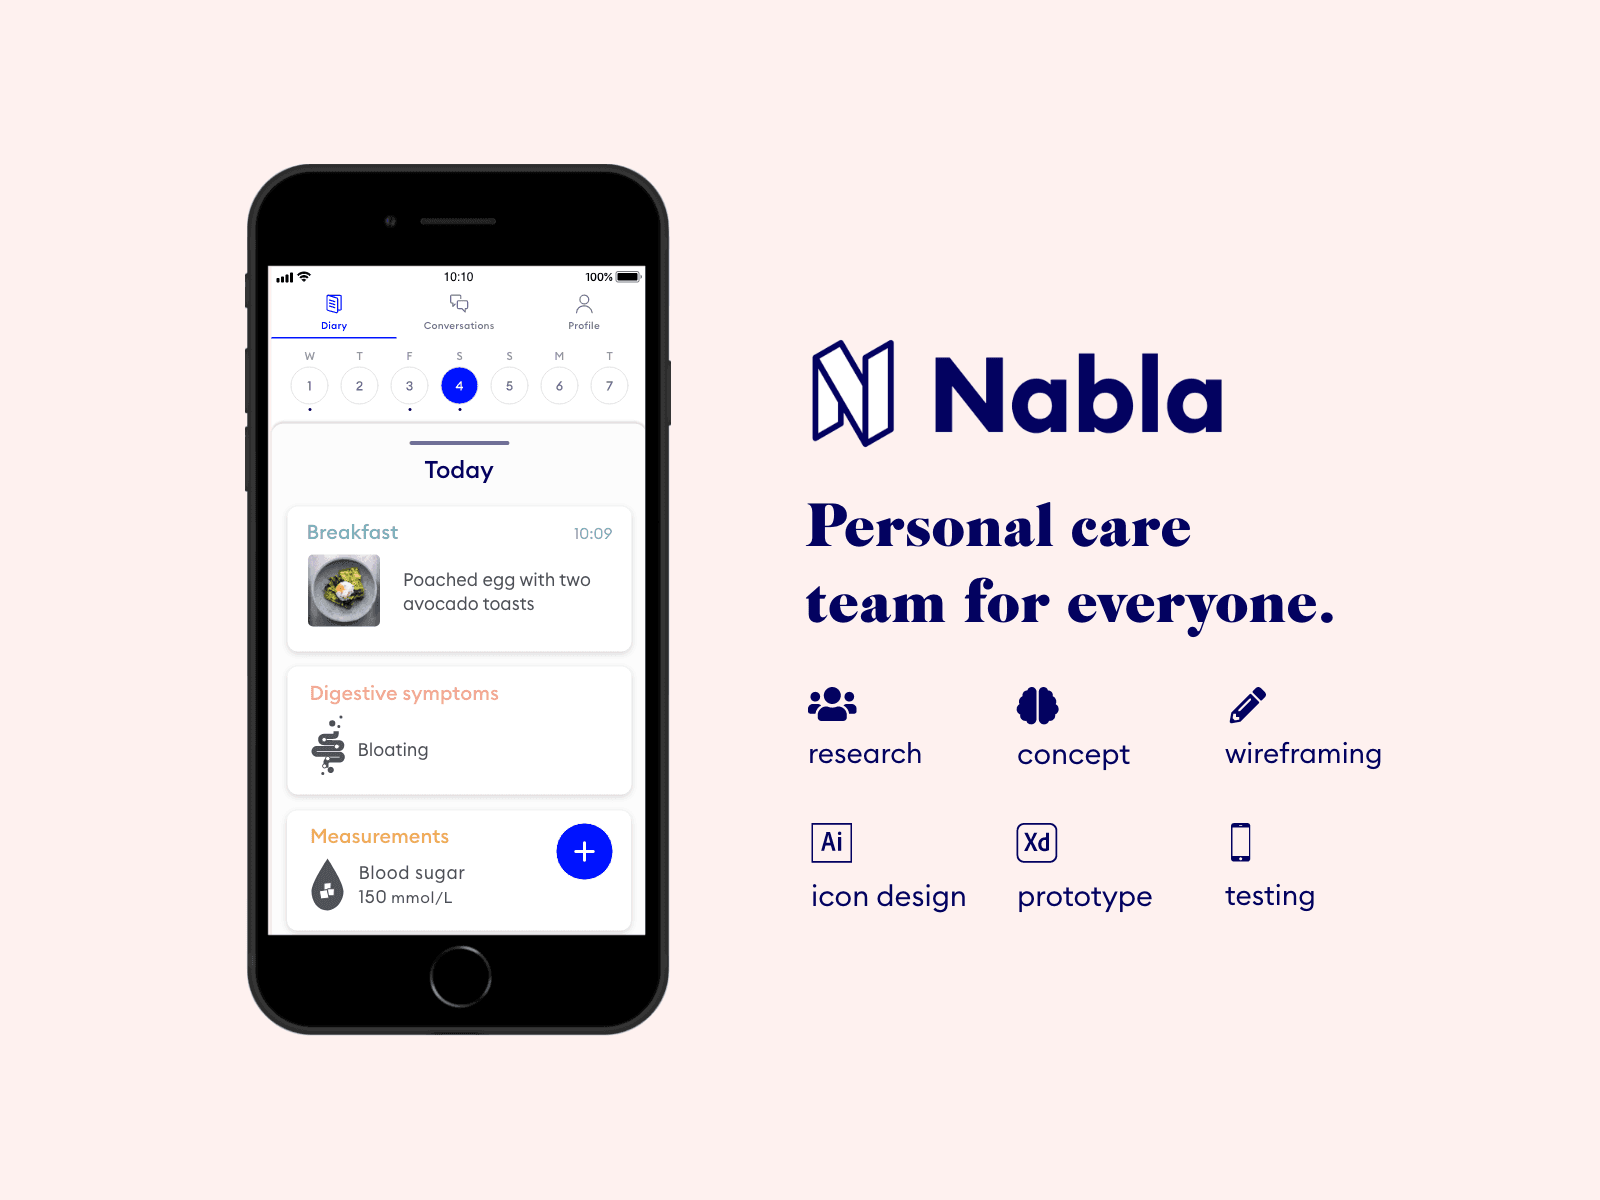 Nabla. Title: personal care for everyone. Text below: research, concept, wireframing, icon design, prototype, testing. Image on the left: mockup of UI